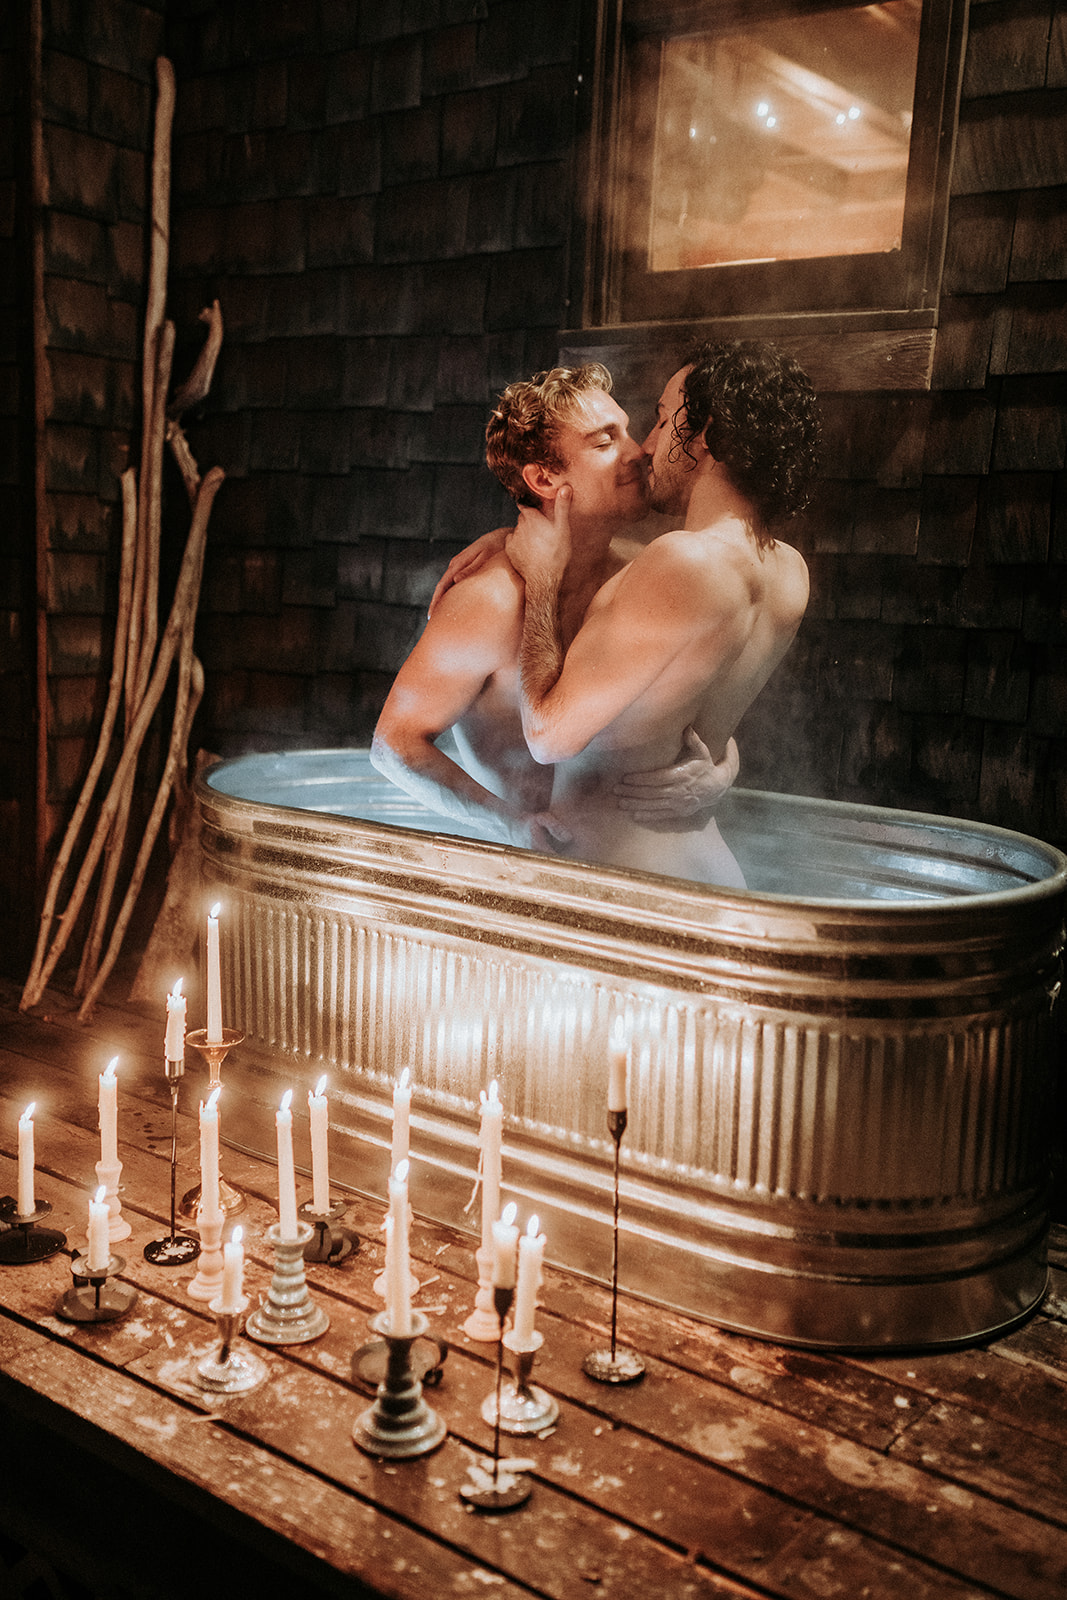 Two gay guys kissing in a hot tub surrounded by candlelight.